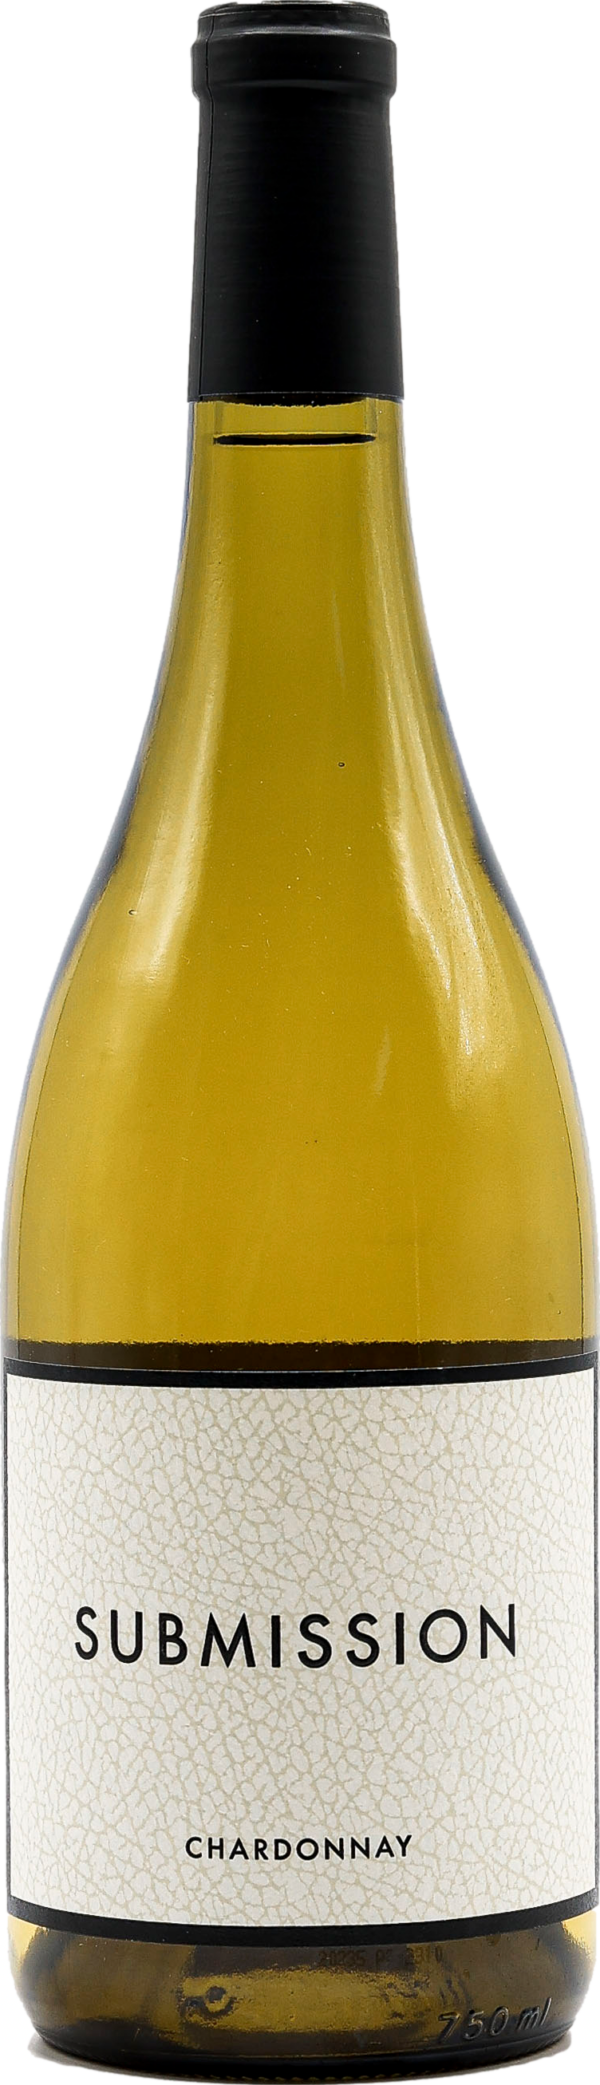 Product image of 689 Cellars Submission Chardonnay 2019 from 8wines